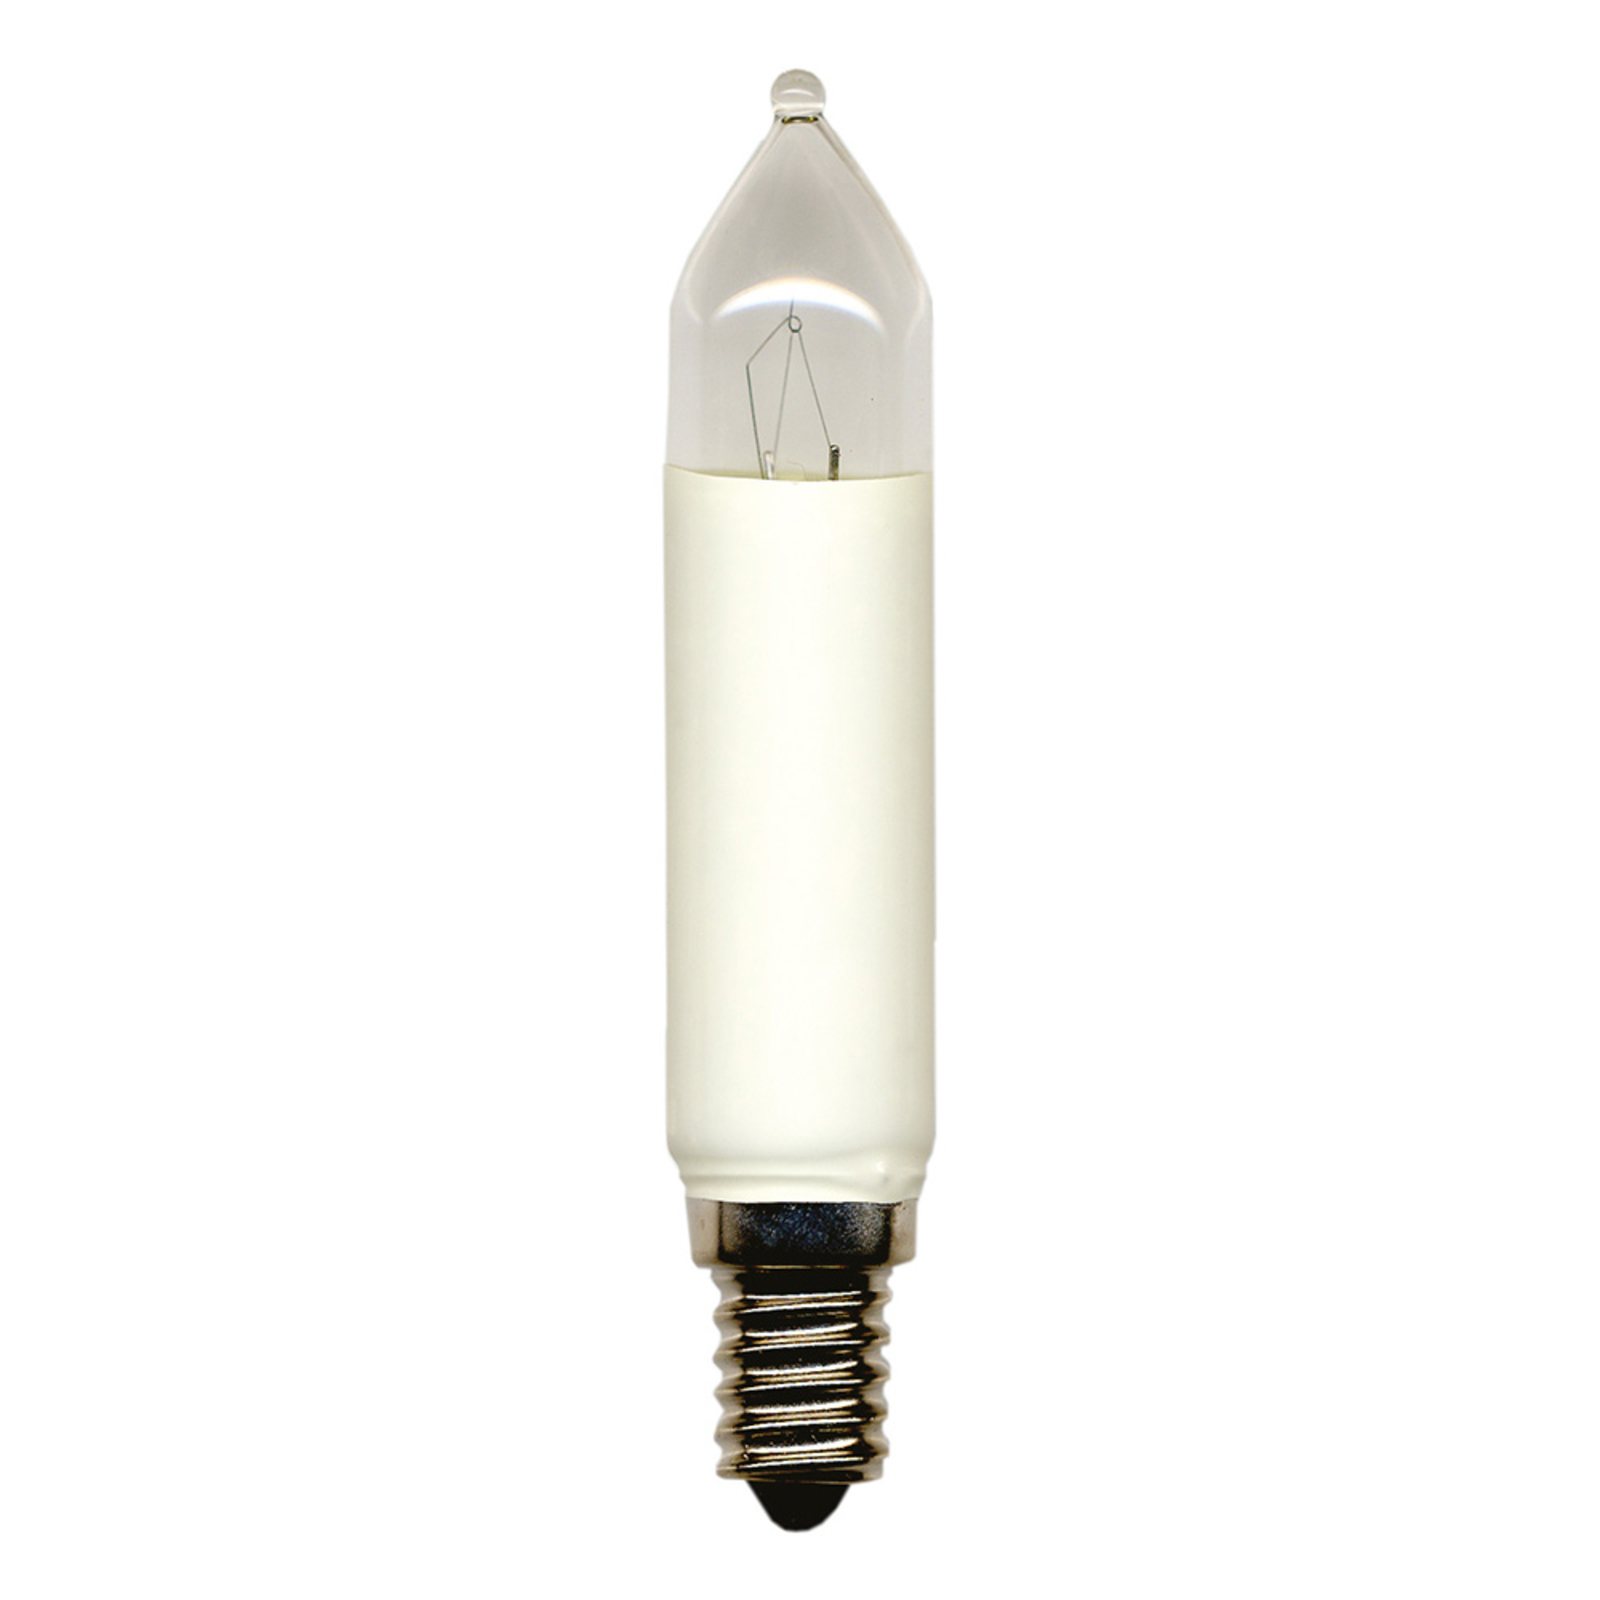 Replacement bulb E14 4 W 16 V 2-pack